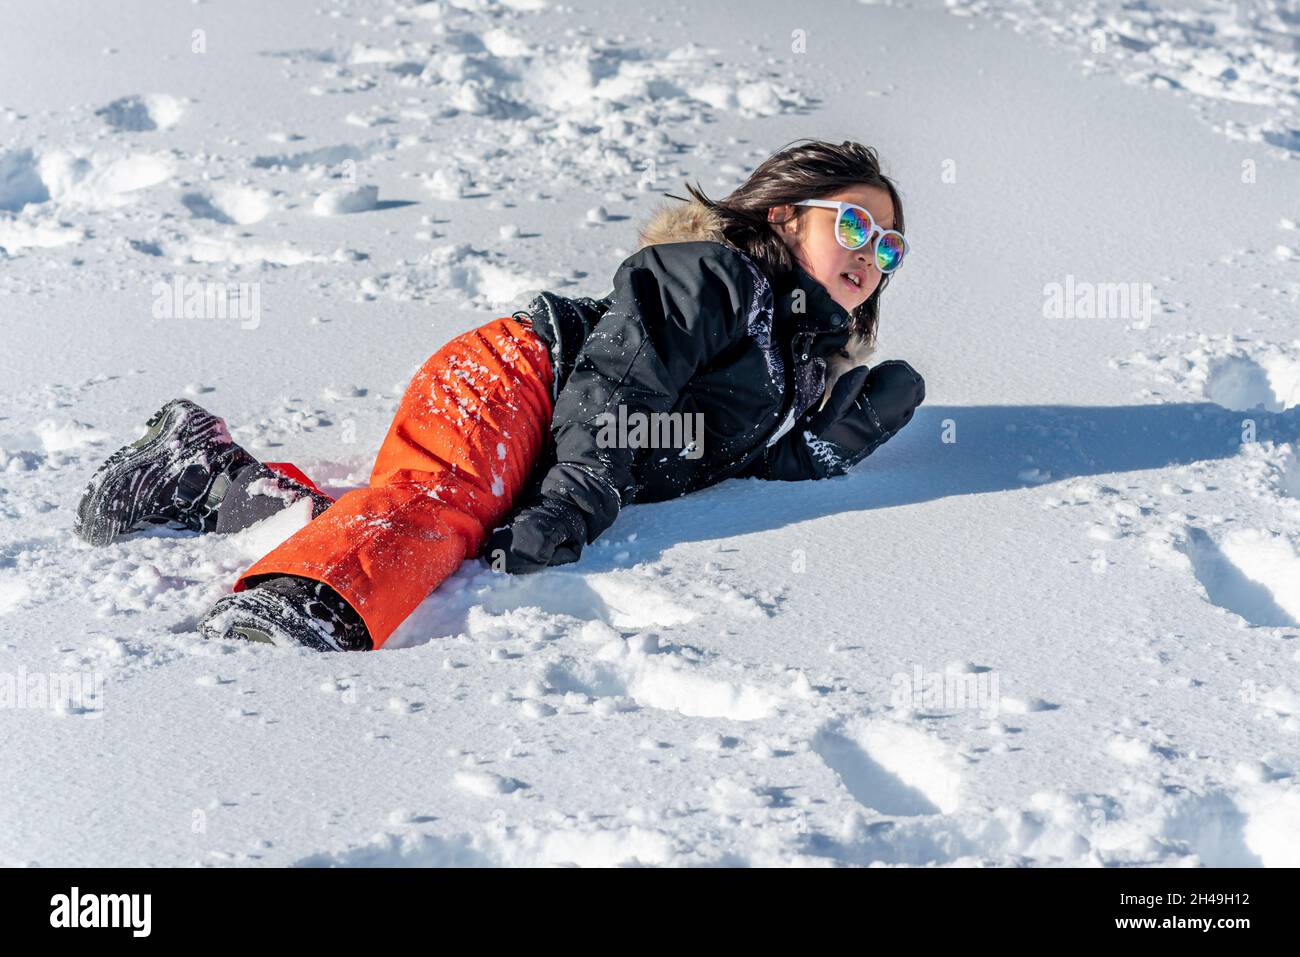 Child falling down in snow. One Asian girl lying on the ground in winter. Sliding danger. Stock Photo